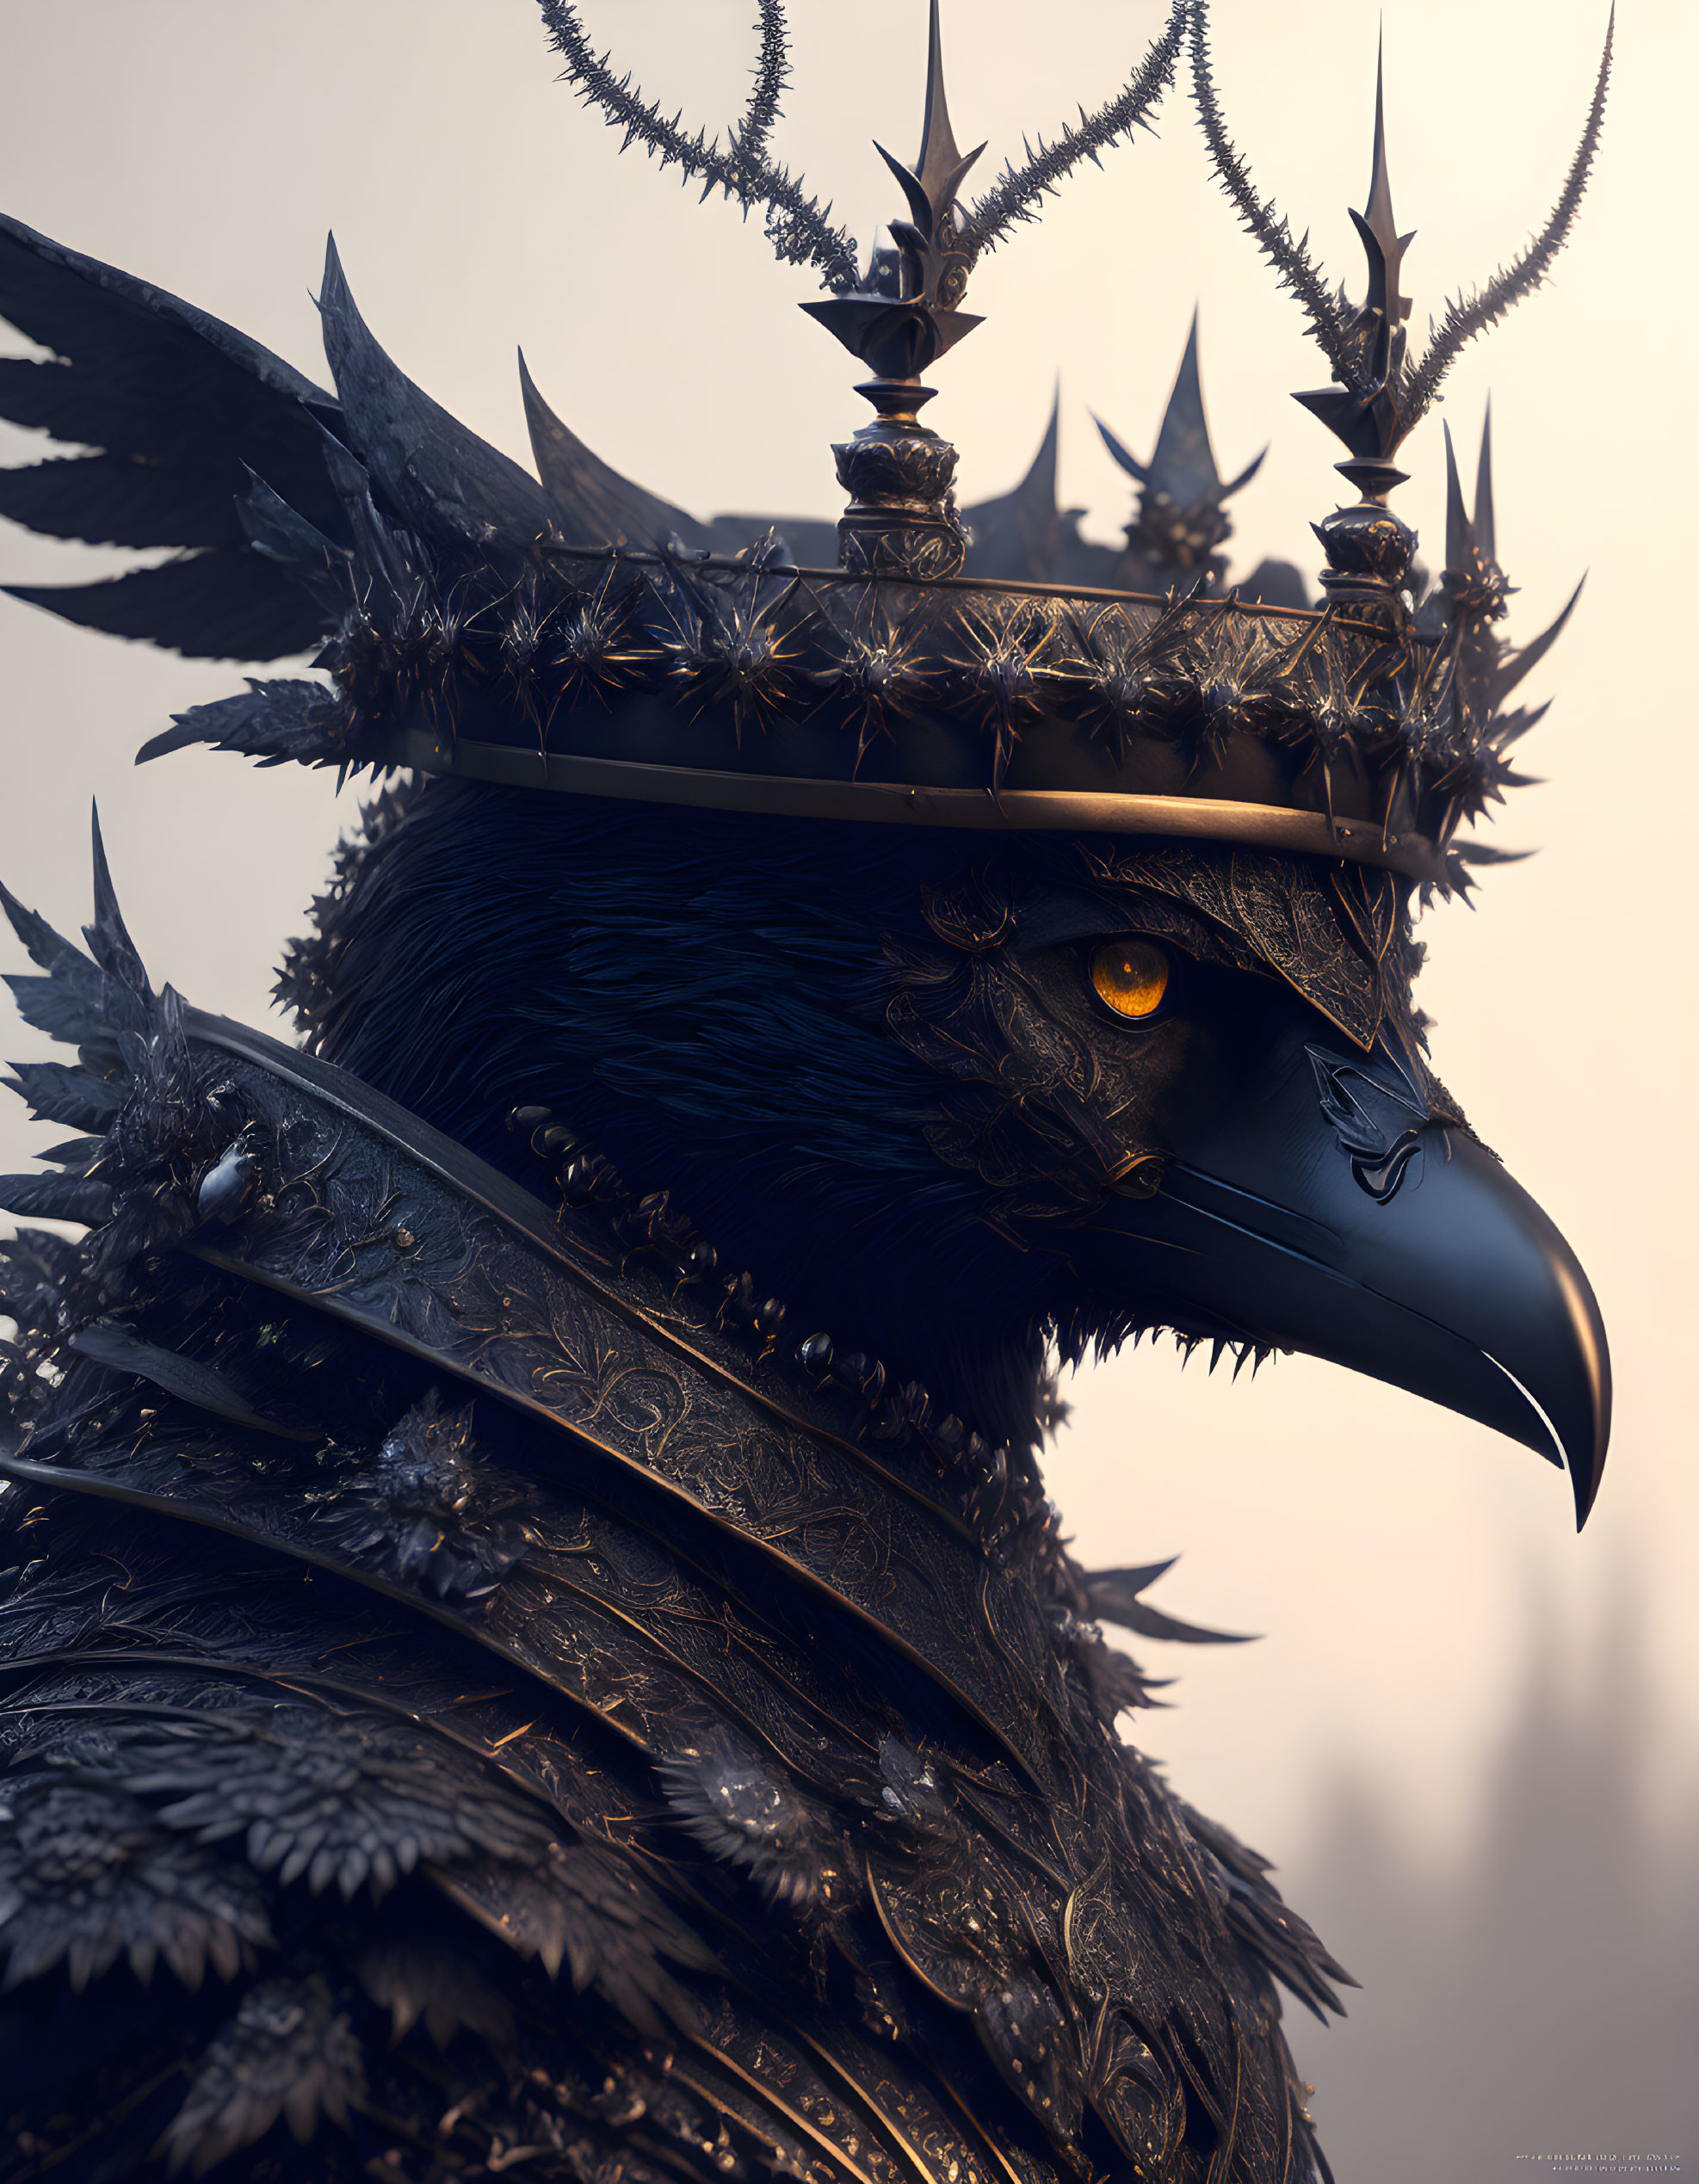 Regal crow with spiky crown in dark armor on misty backdrop